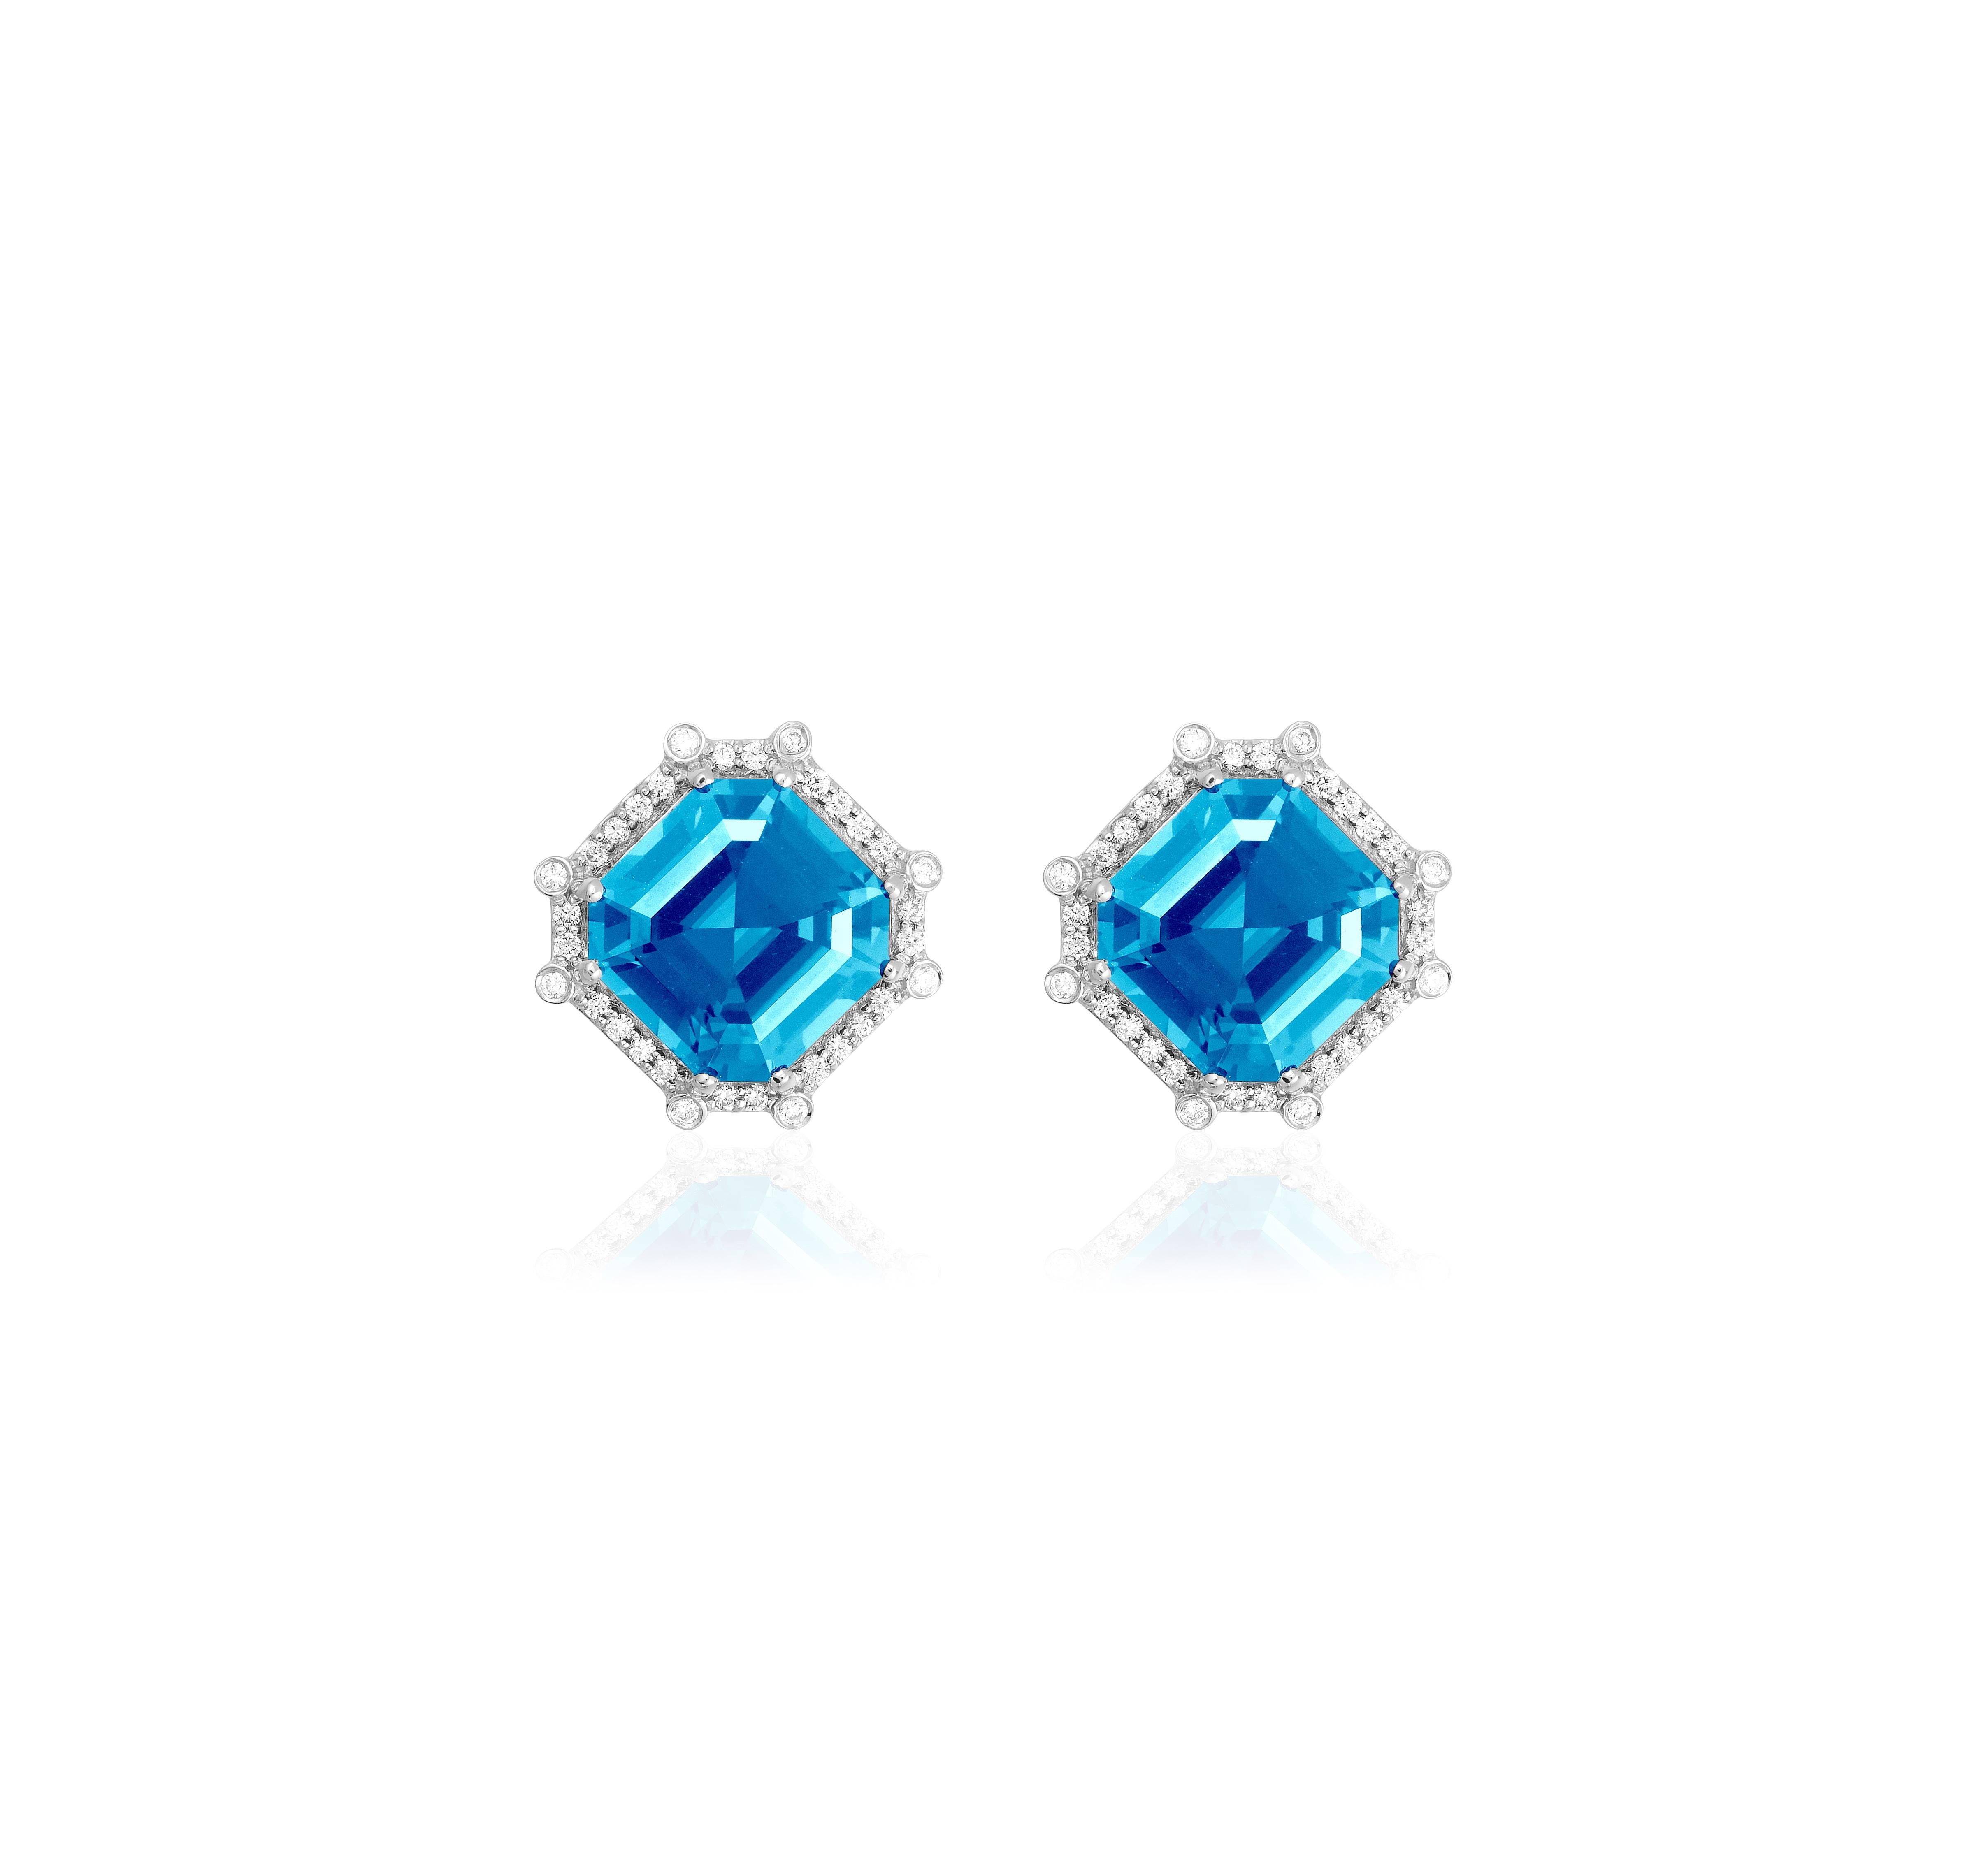 Blue Topaz & Diamond Octagon Studs in 18K White Gold from 'Gossip' Collection

Stone Size: 9 x 9 mm

Gemstone Approx Wt: Blue Topaz- 7.86 Carats

Diamonds: G-H / VS, Approx Wt : 0.23 Cts